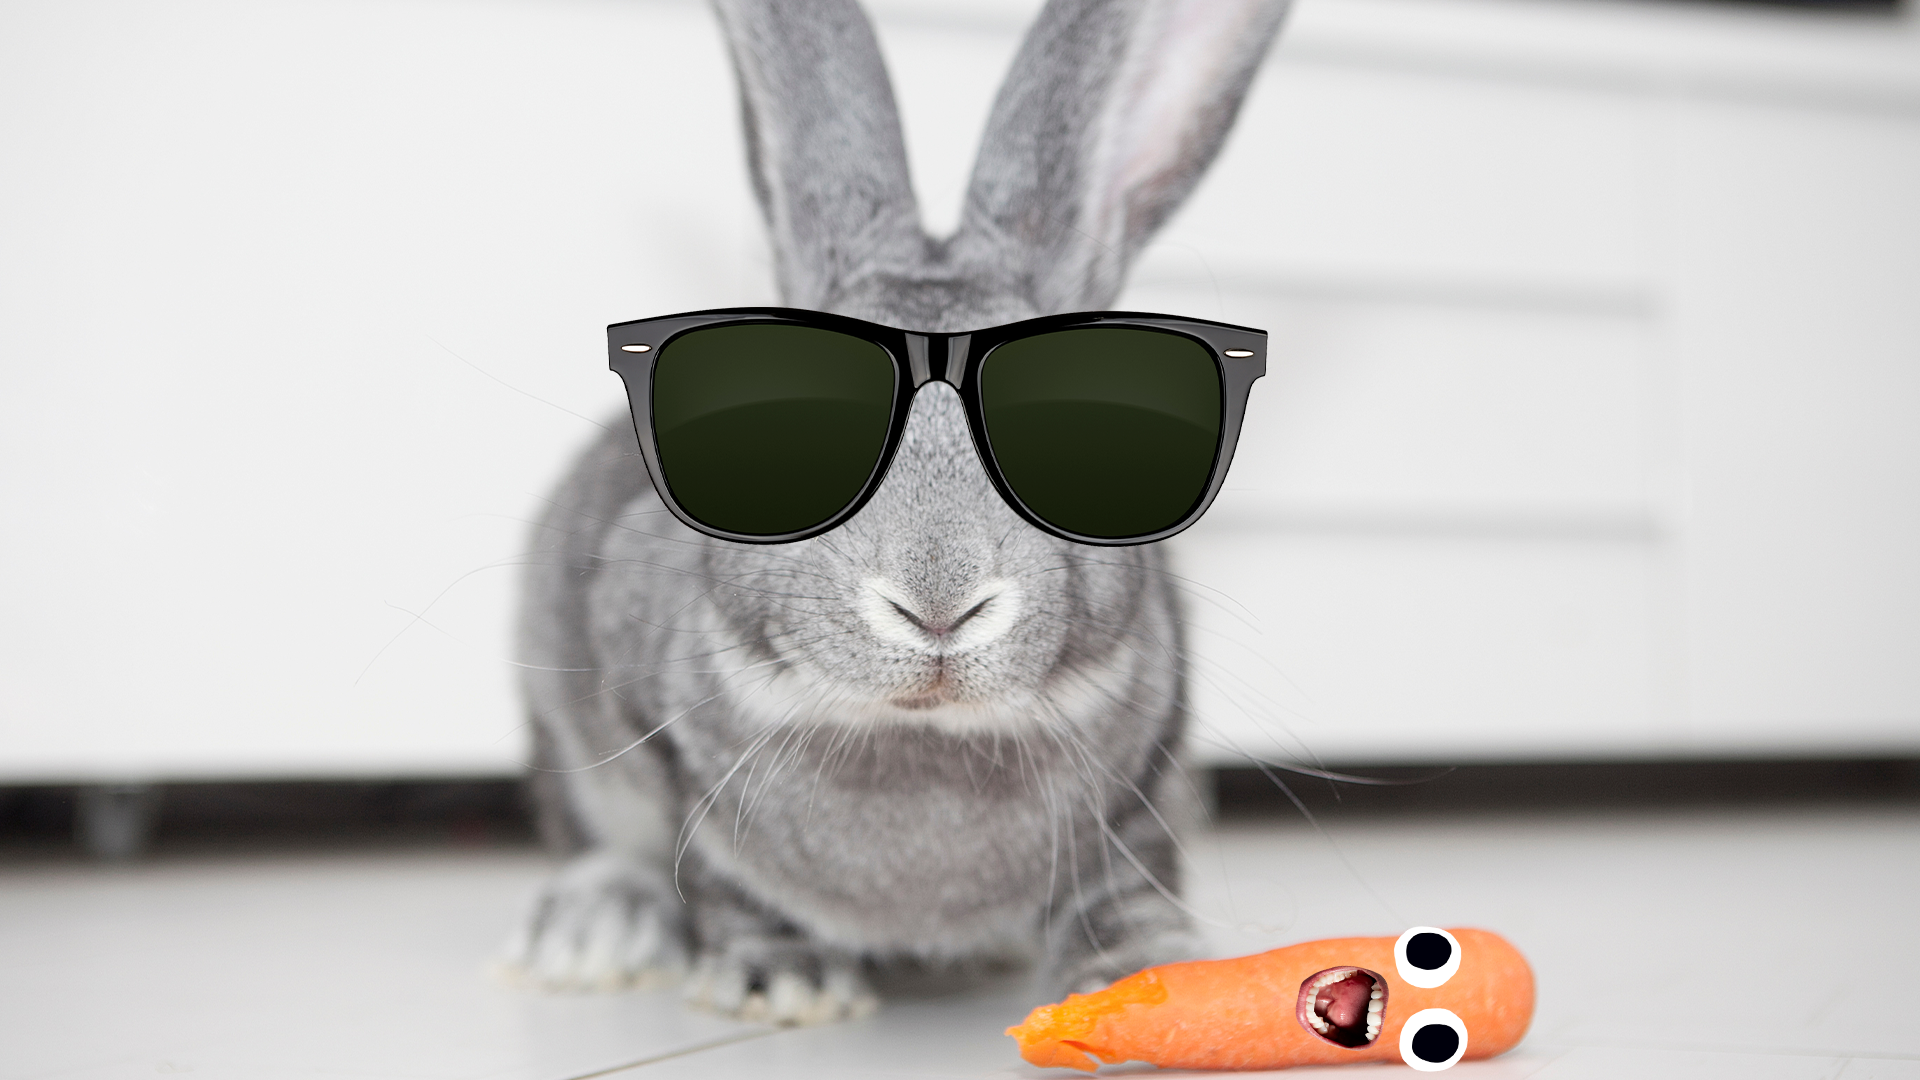 Rabbit in sunglasses and carrot with face